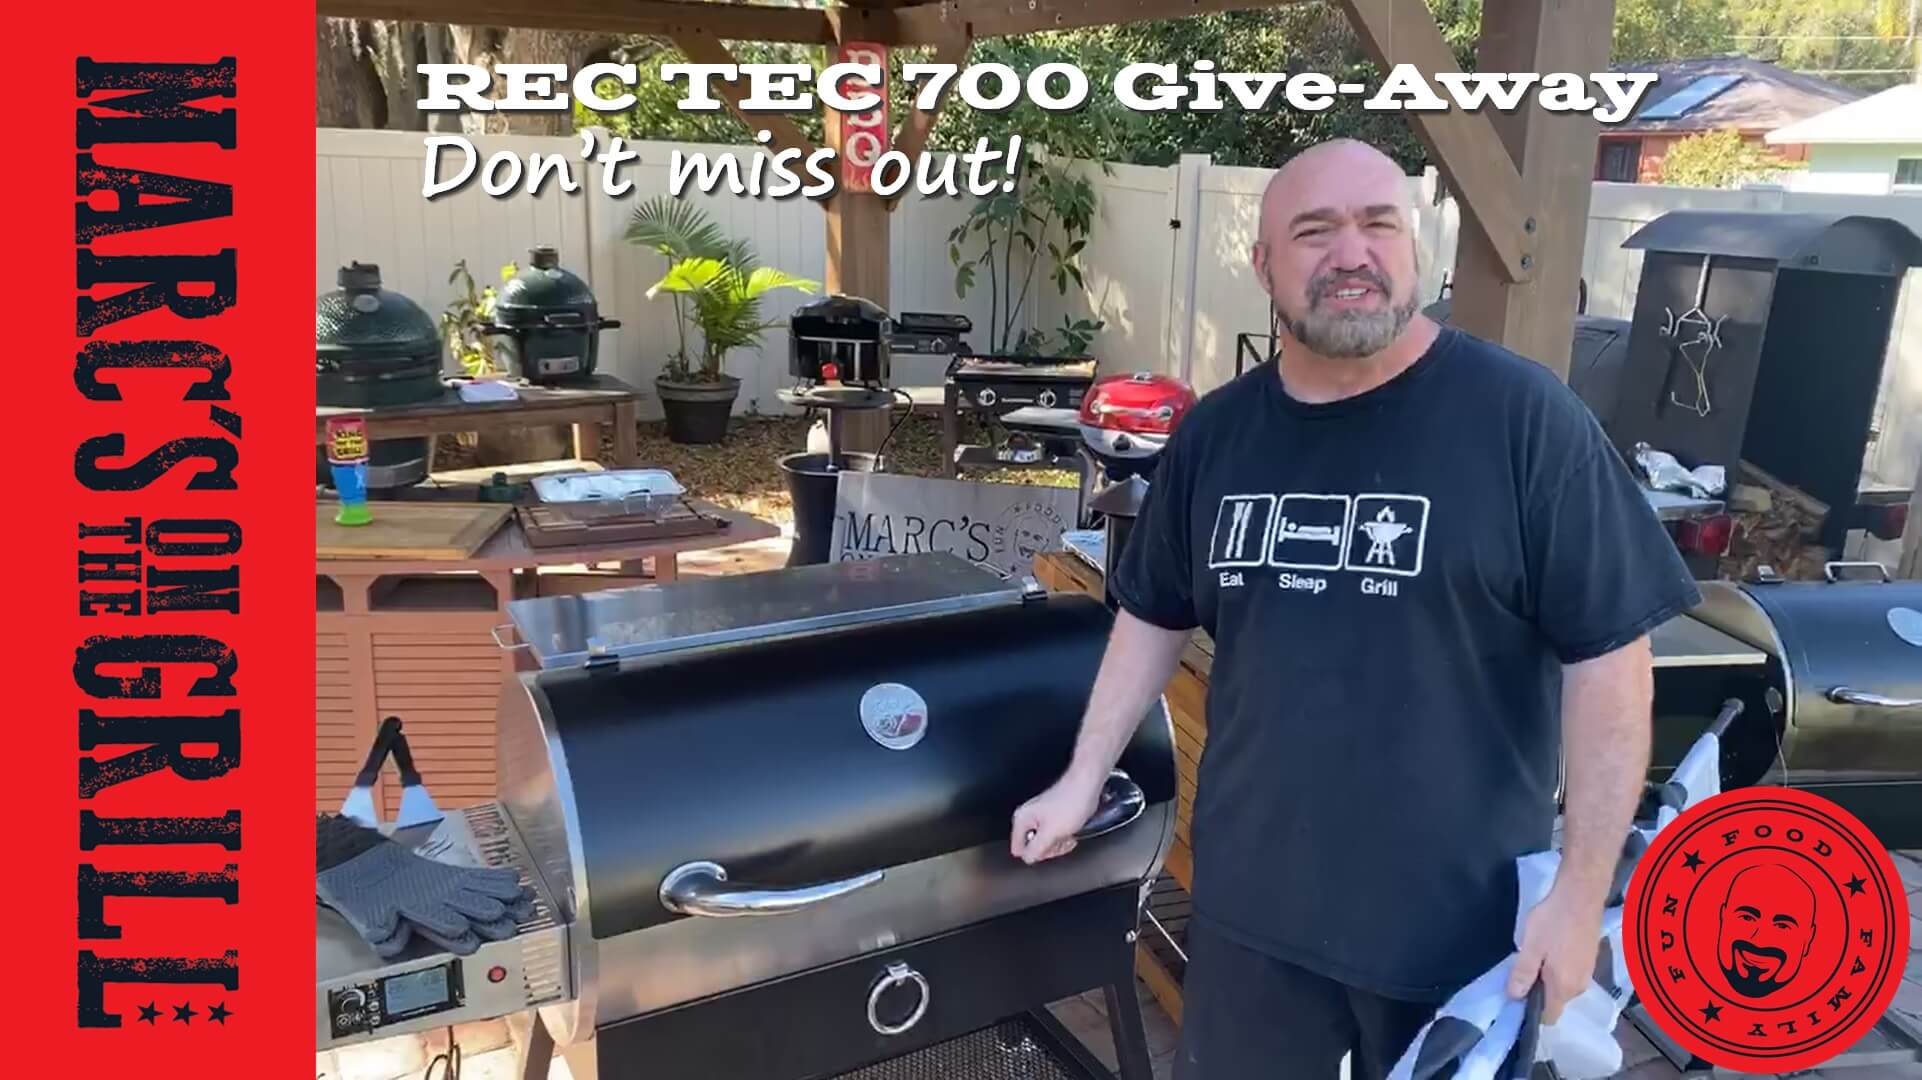 Get chances to win a brand new REC TEC 700 Pellet Grill from Marc's on the Grill and the good folks at REC TEC